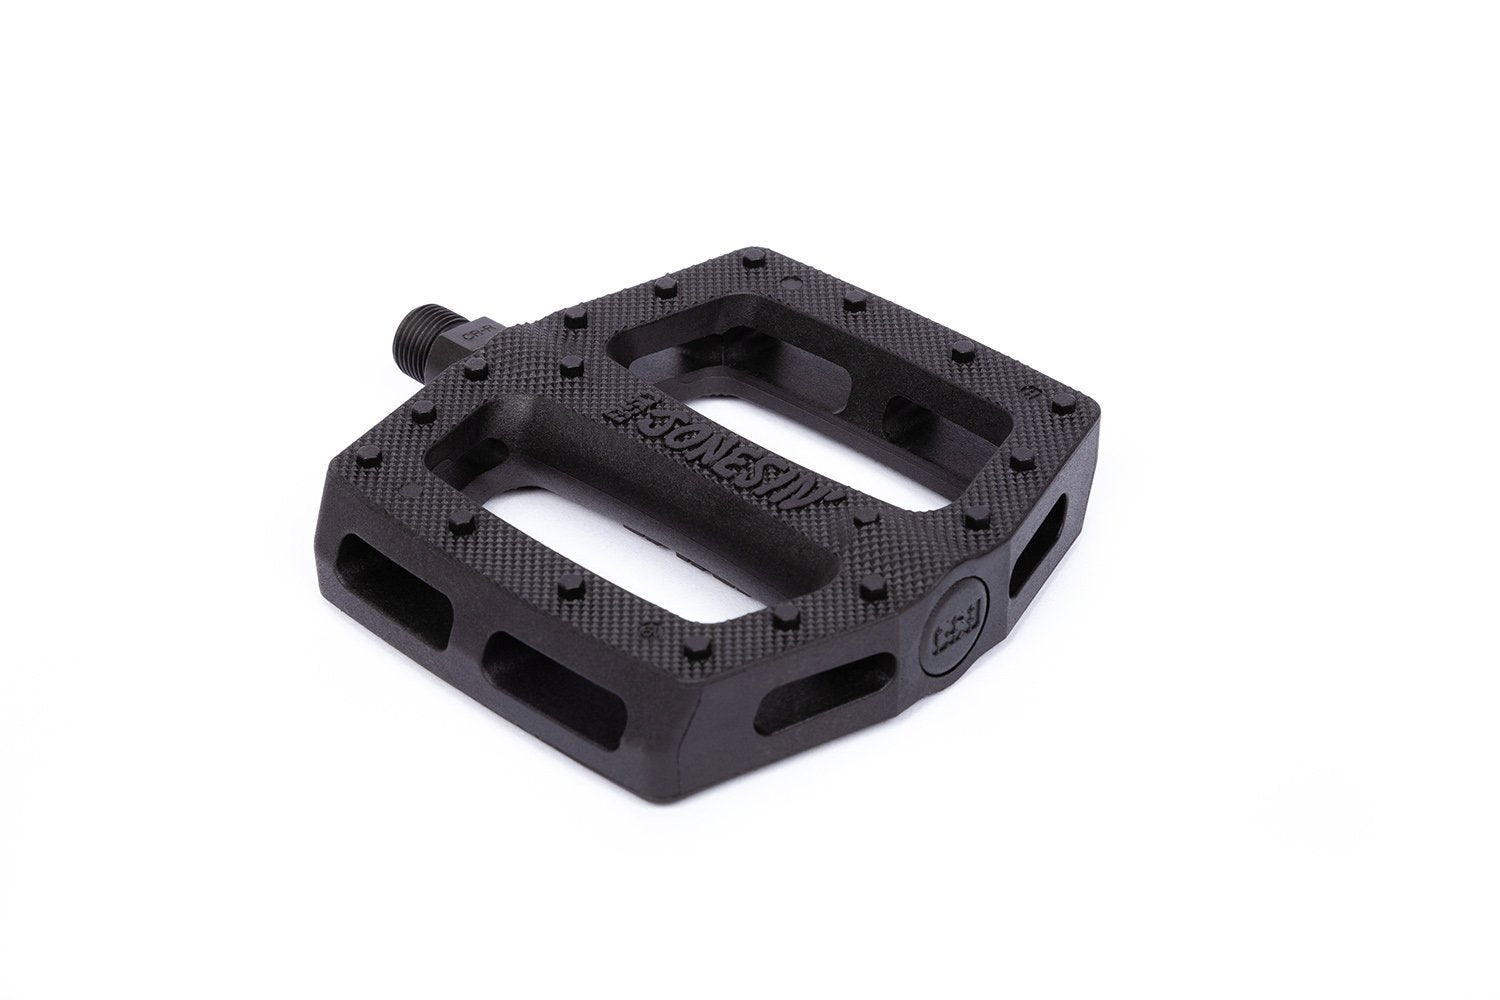 top view of the BSD Jonesin pc pedals in black